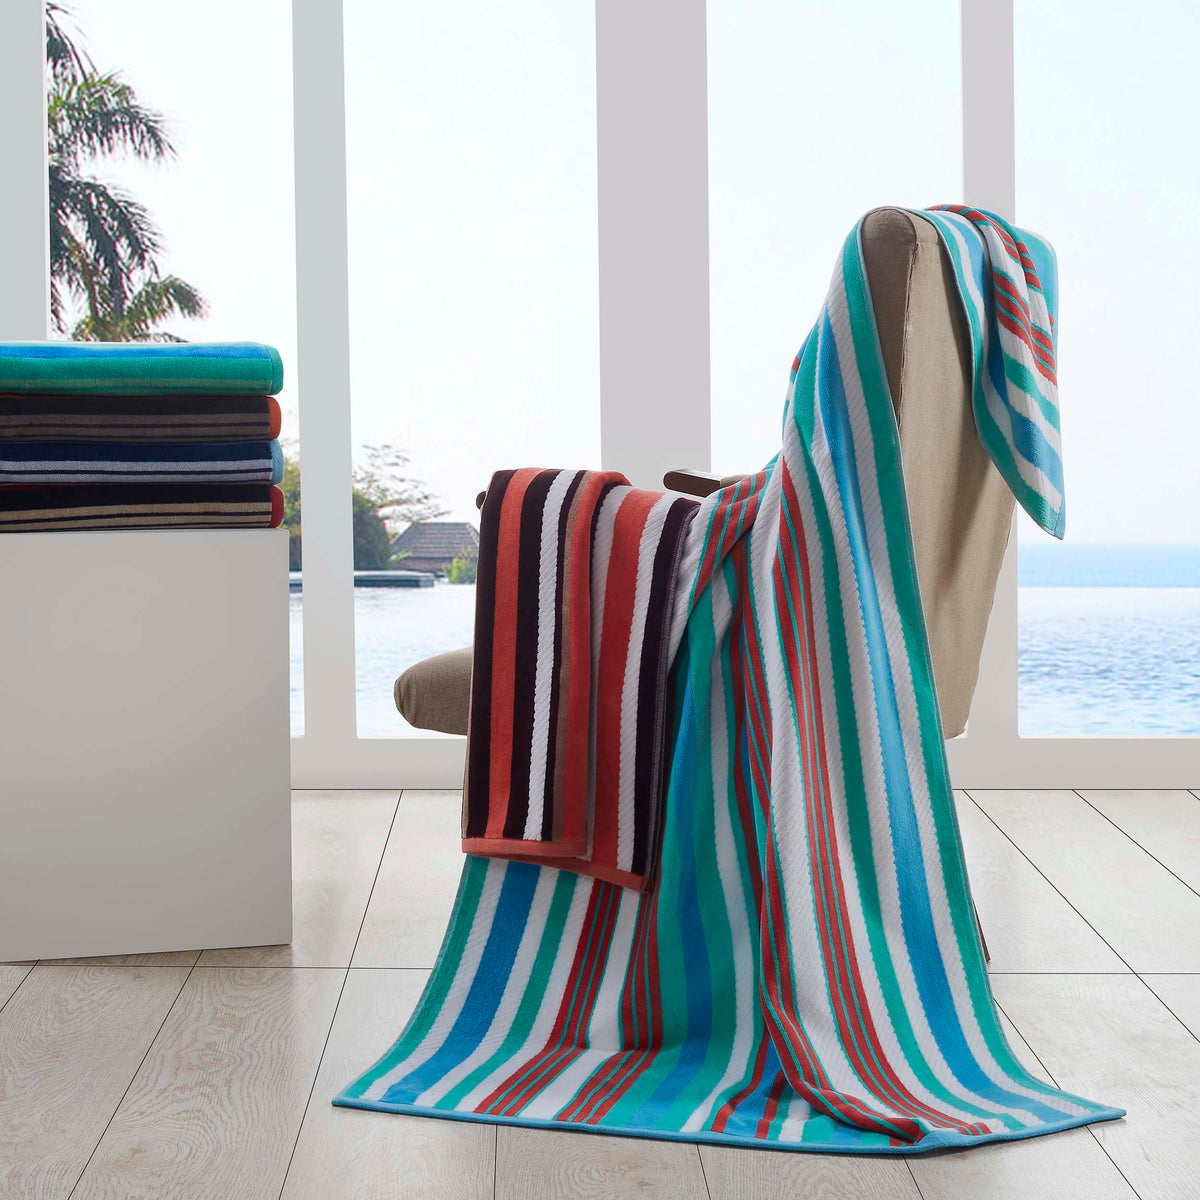 2 Piece Rope Textured Striped Oversized Cotton Beach Towel Set